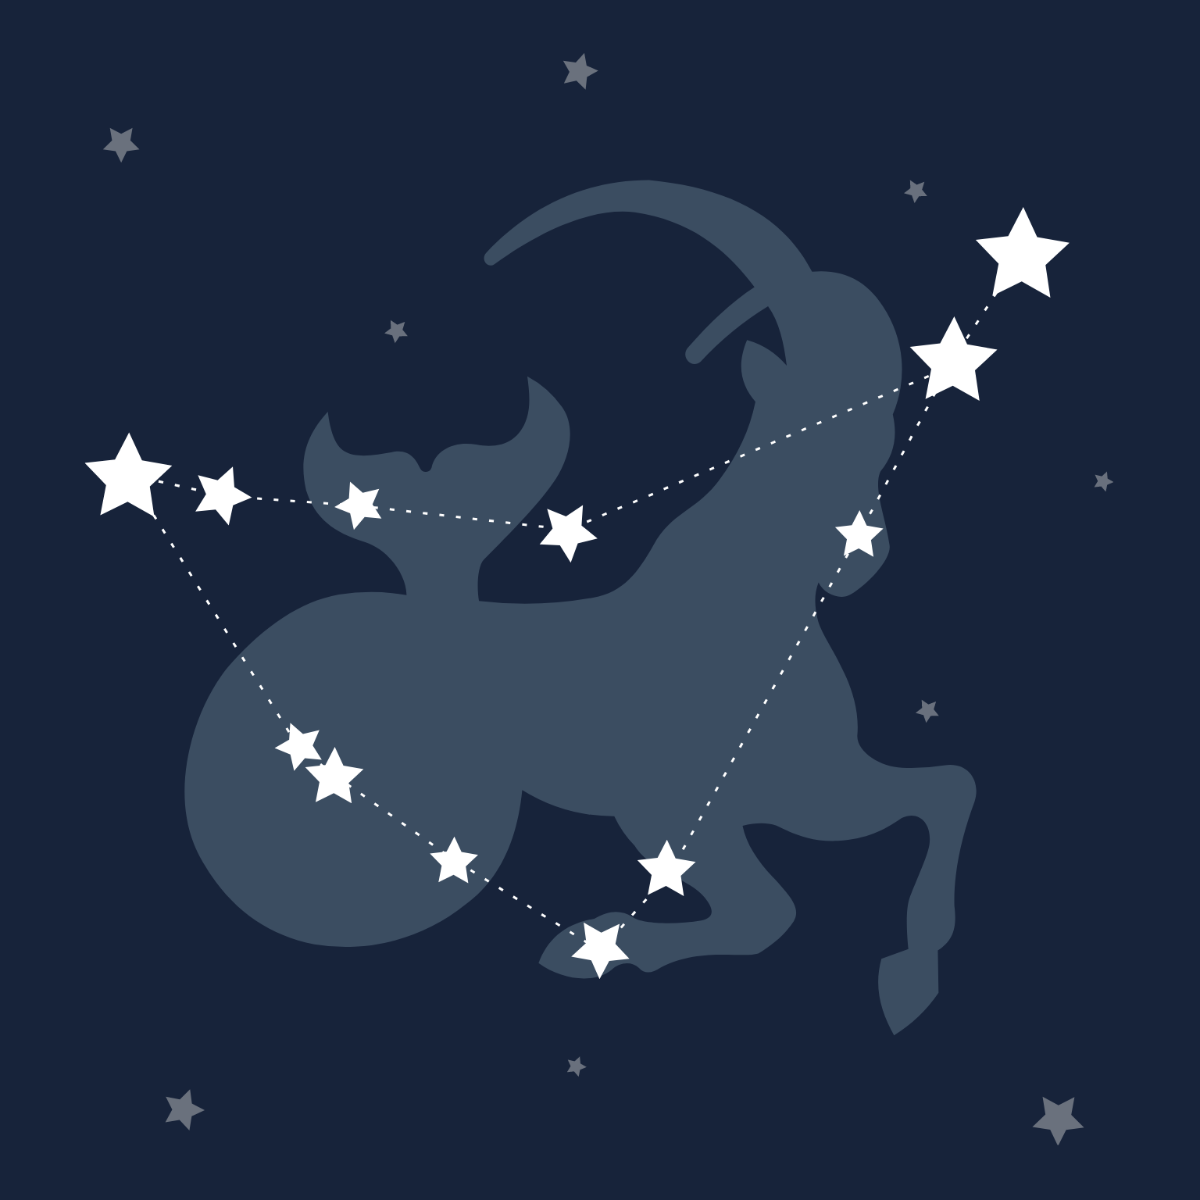 FREE Constellation Templates & Examples - Edit Online & Download ...